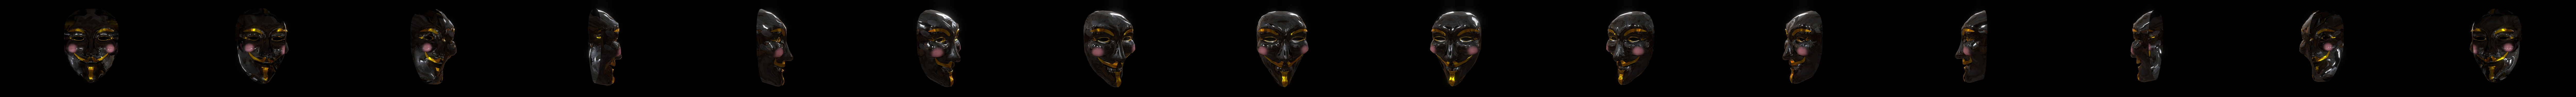 Anonymous Mask - 3D Animation - PixelBoom